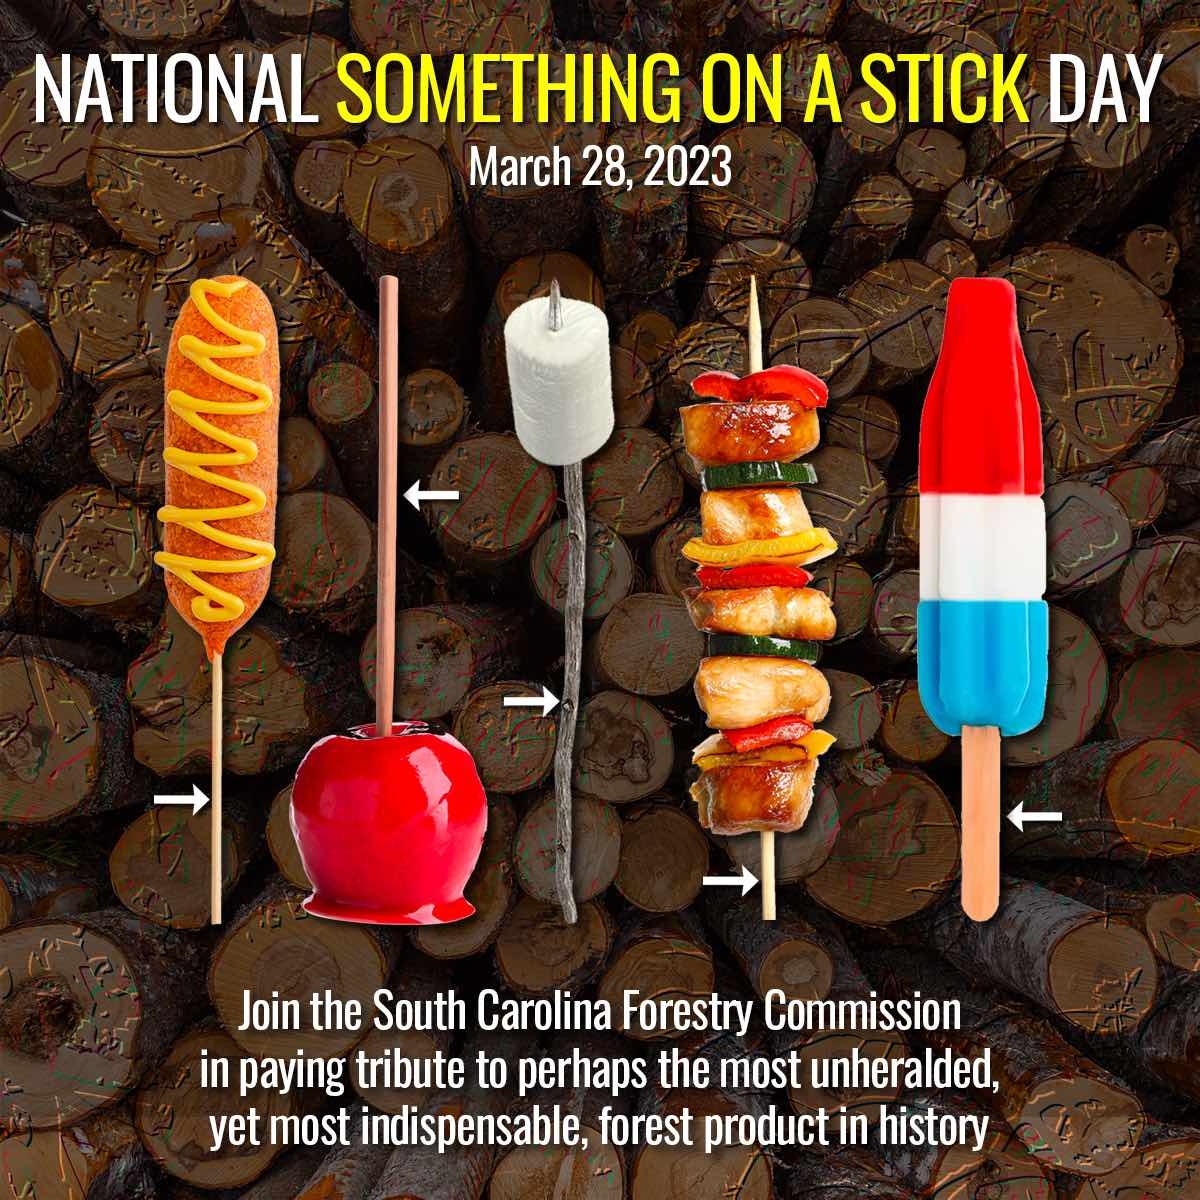 Today is National 'Something On A Stick' Day!
Celebrate with us as we honor the forgotten forest product that fastens a few of our favorite foods!⁠
#SticksAreForestProductsToo #SCForestry #ForestLife #StickLife #SomethingOnAStickDay #ForestProducts #Sticks